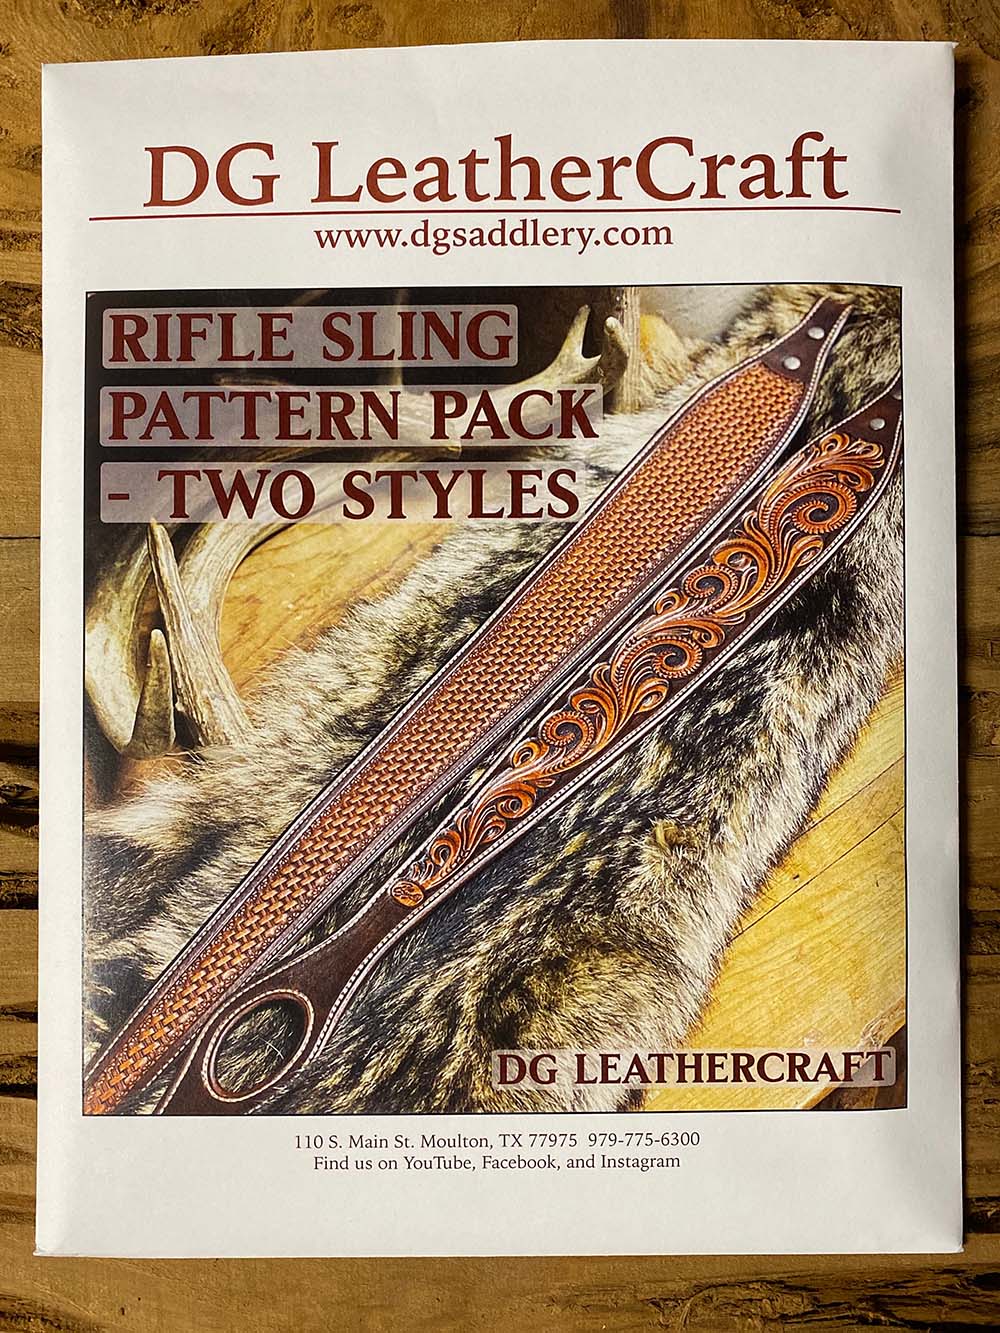 Rifle Sling Pattern Pack - Two Styles